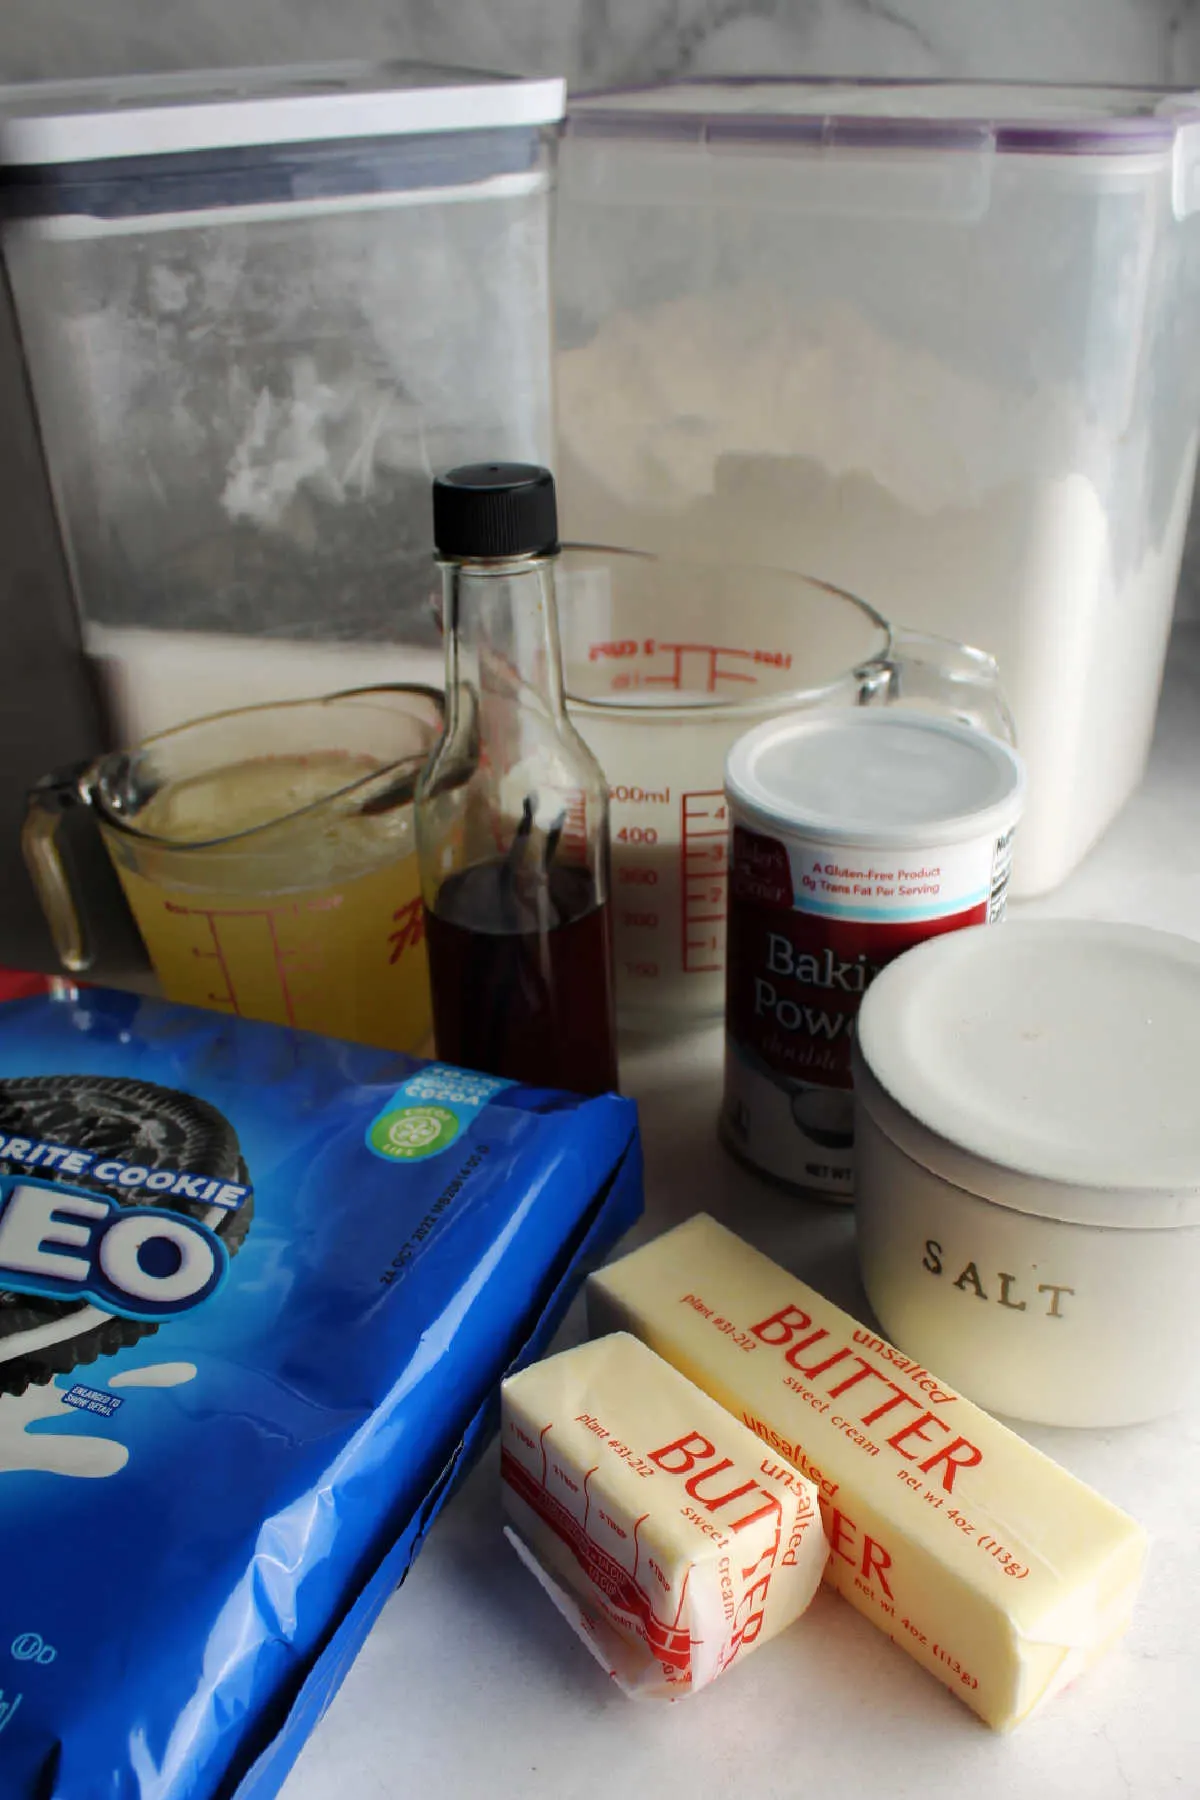 Ingredients for cookies and cream cake, including butter, sugar, flour, vanilla, egg whites, milk and Oreos.